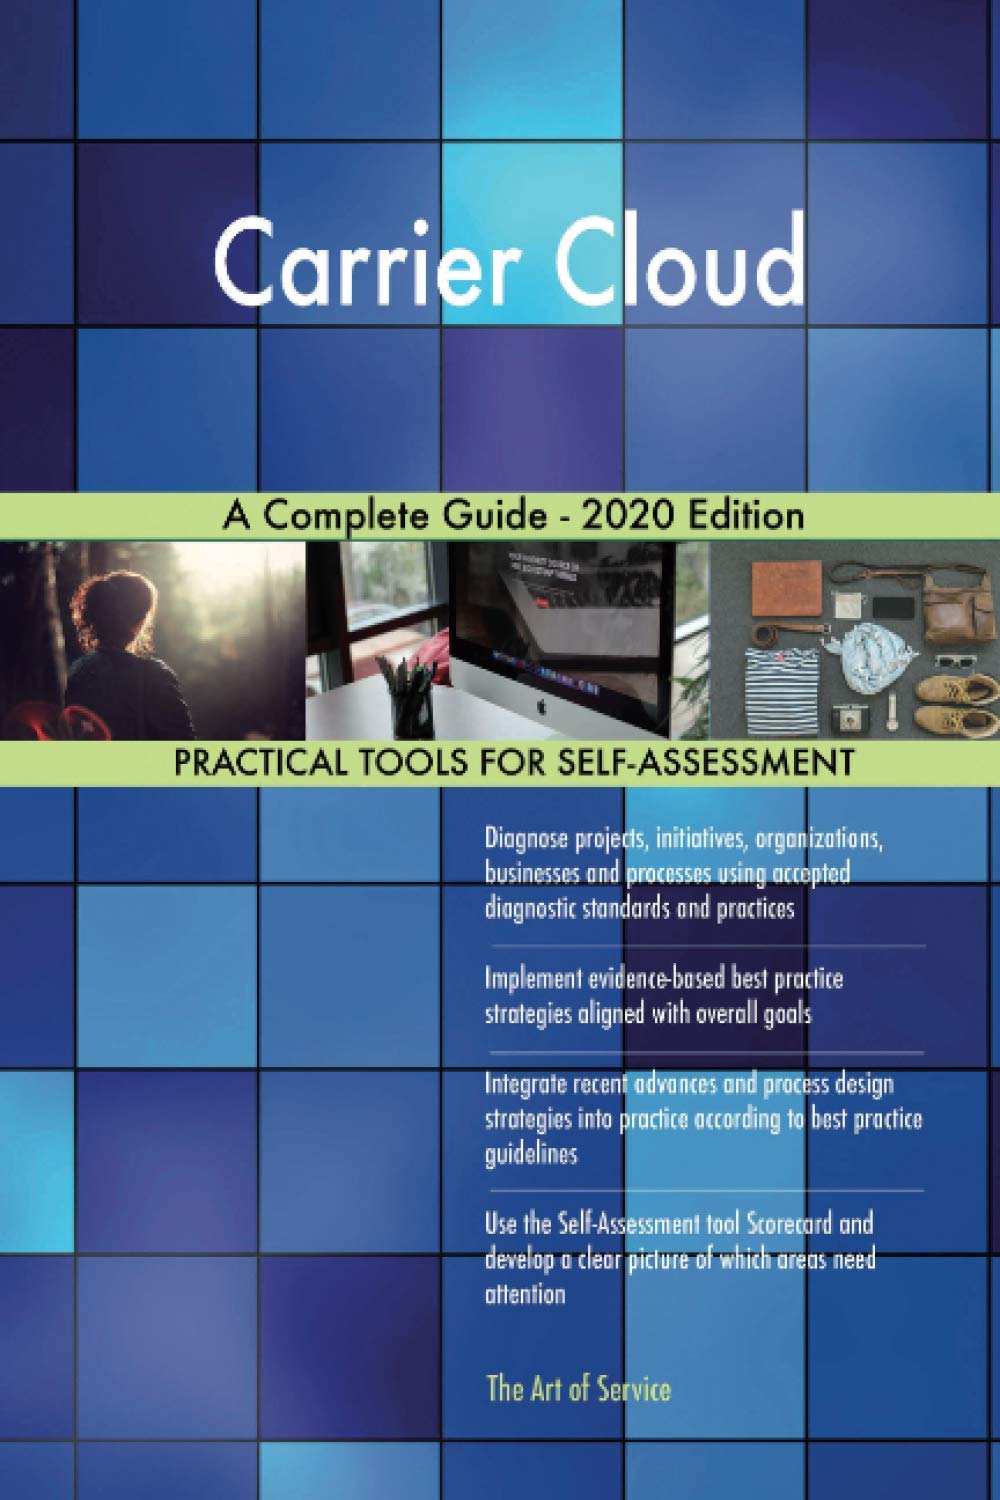 Carrier Cloud A Complete Guide - 2020 Edition